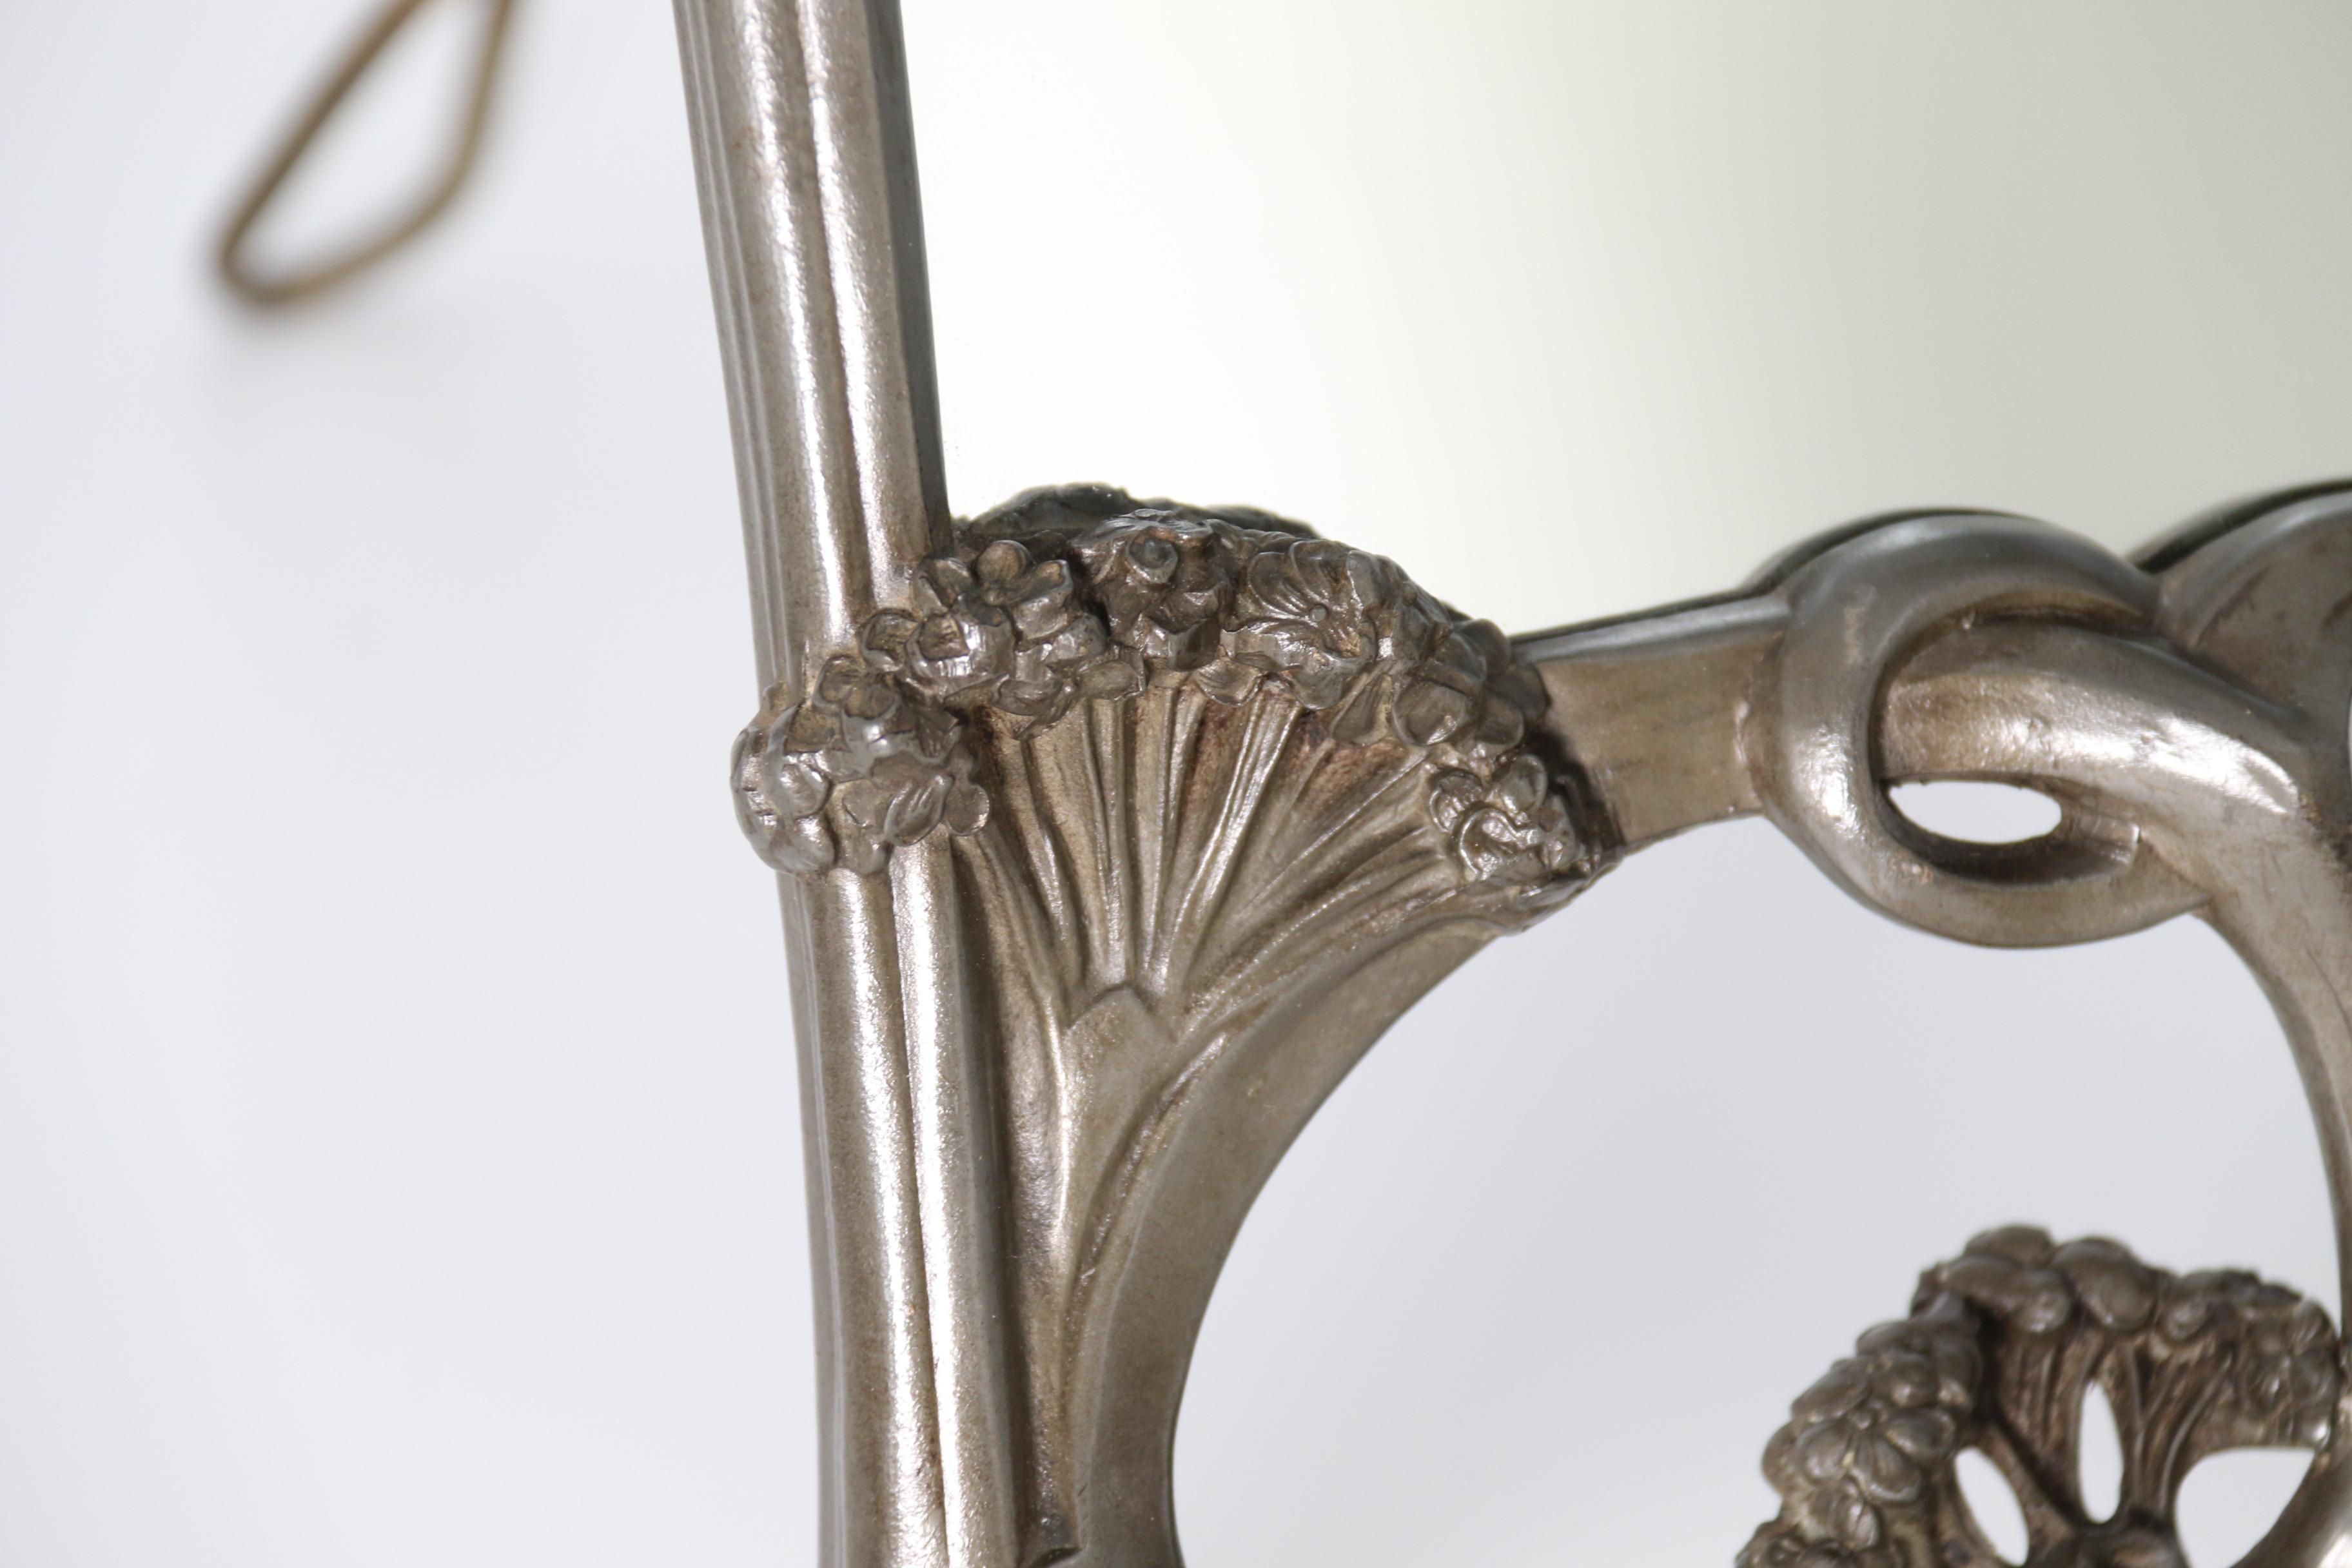 Pewter An Art Nouveau mirror by the French 19th century sculptor Louis Auguste Moreau. For Sale